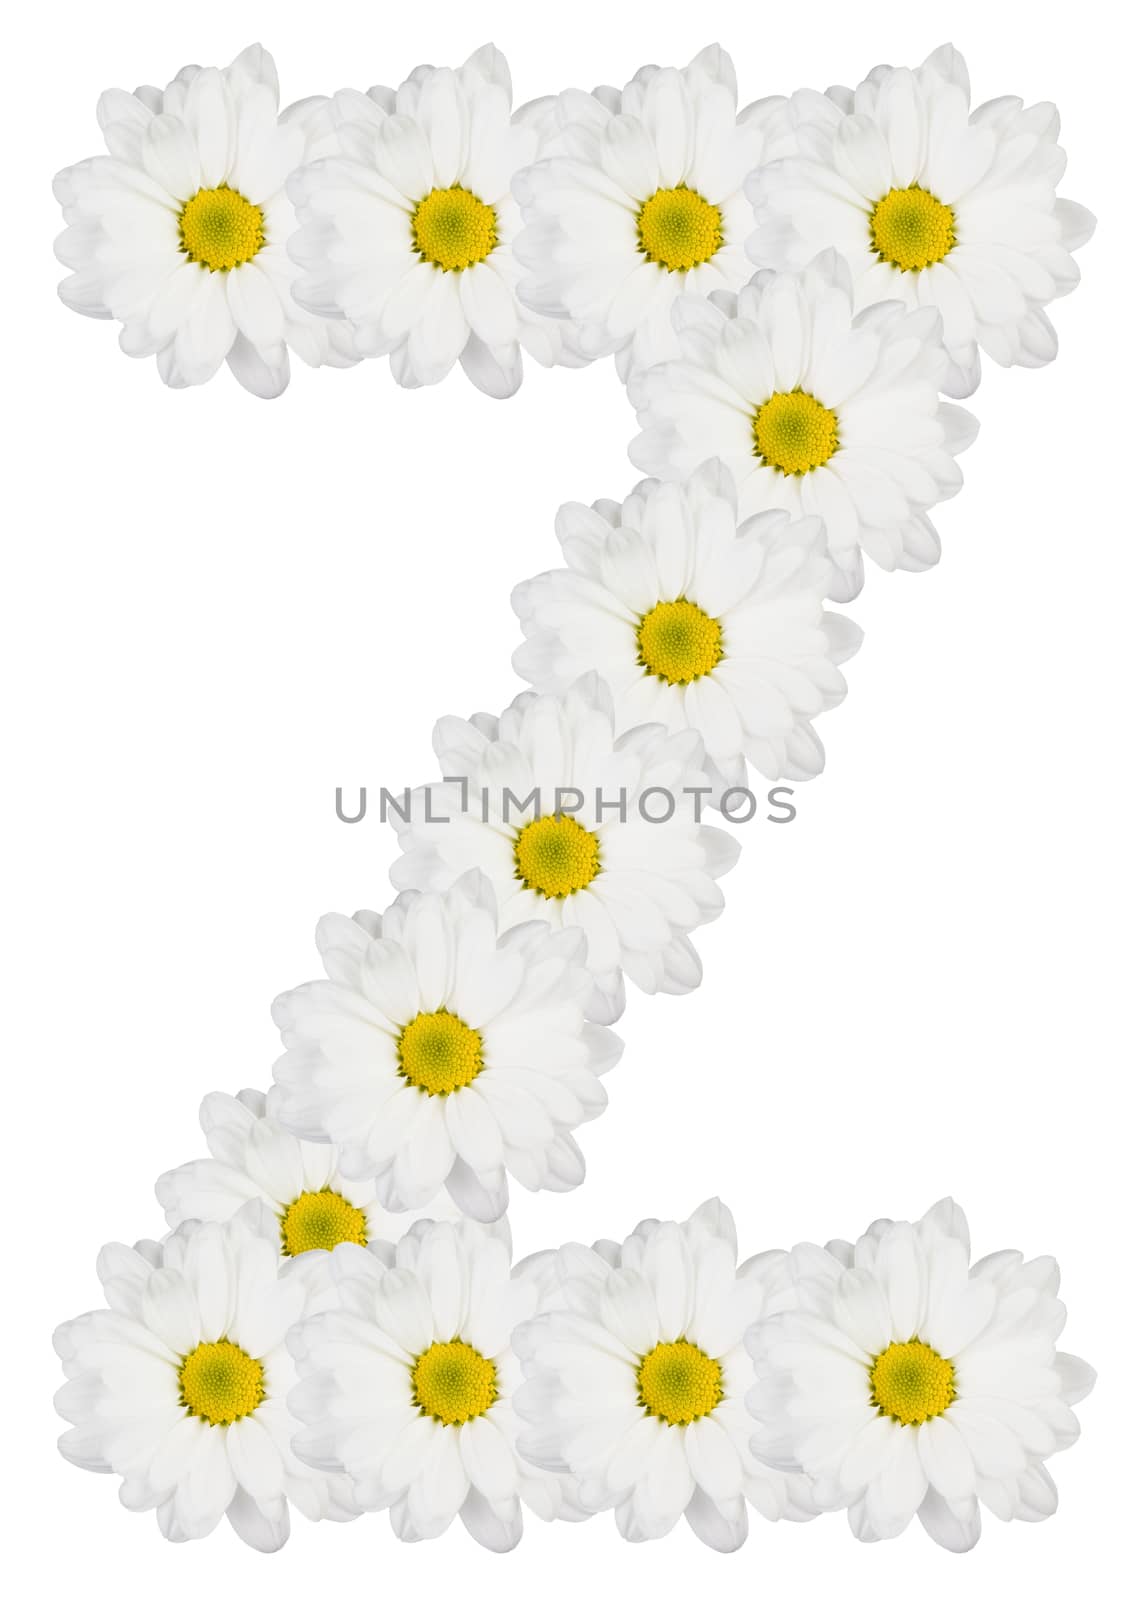 Letter Z made from white flowers